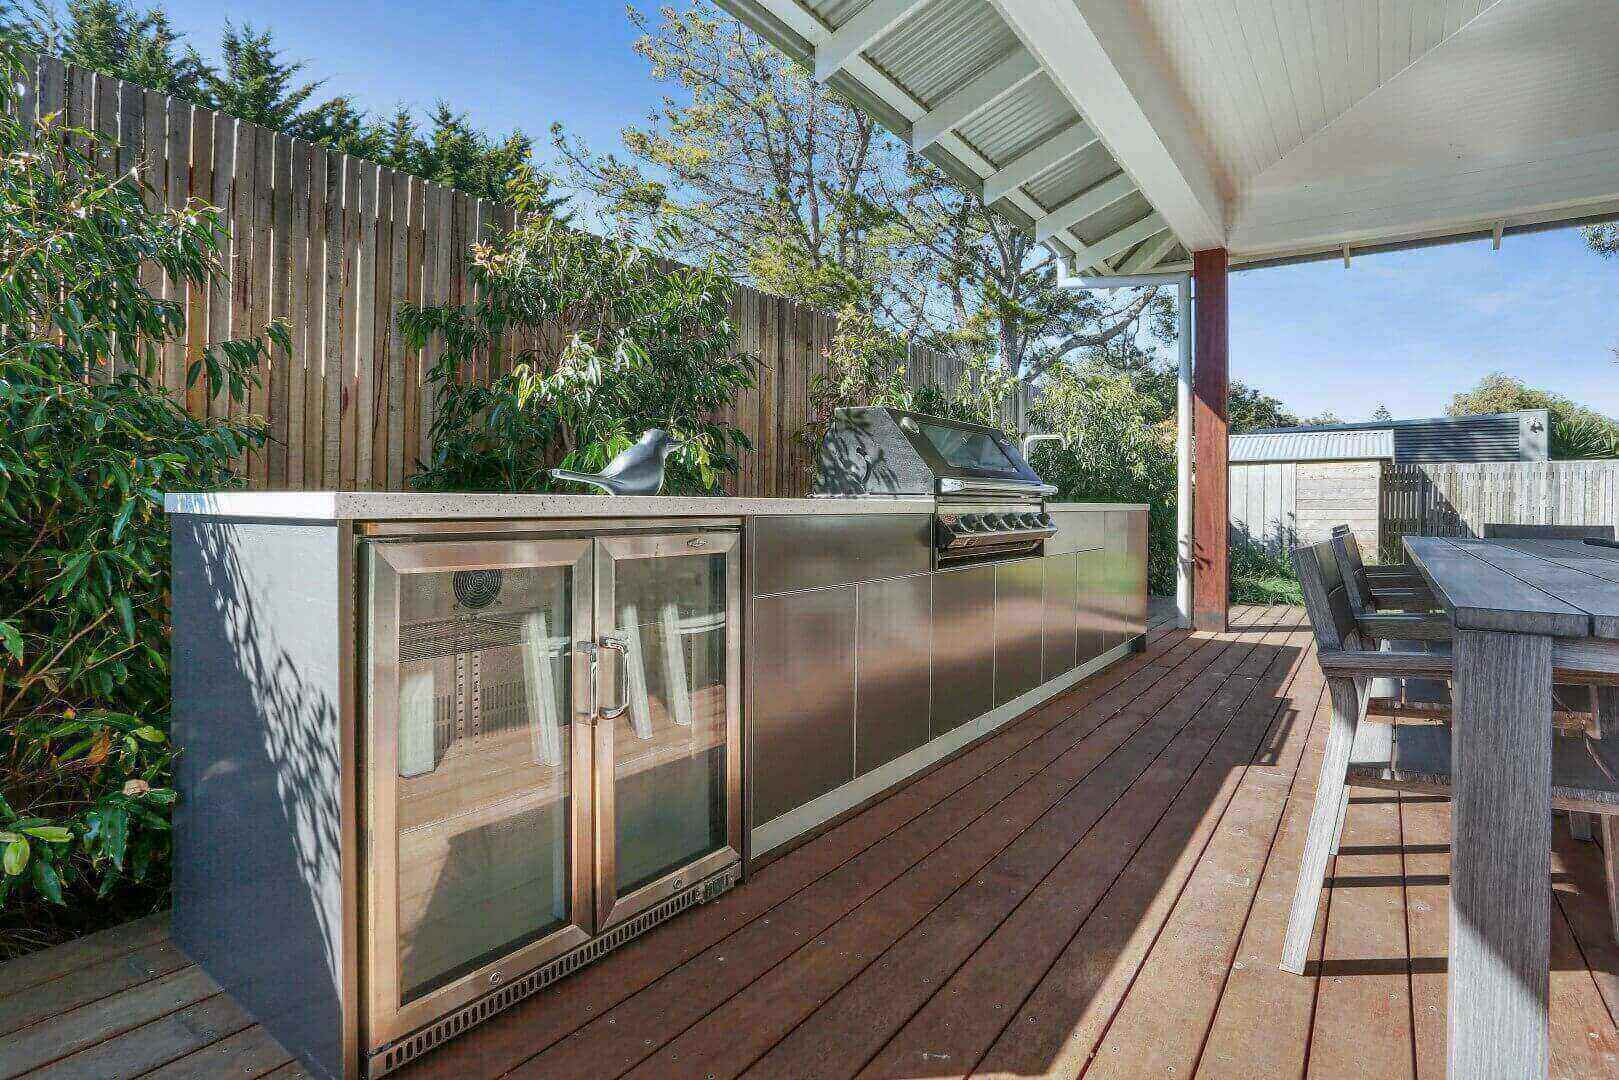 5 Reasons why you should engage a specialist for your Outdoor Kitchen